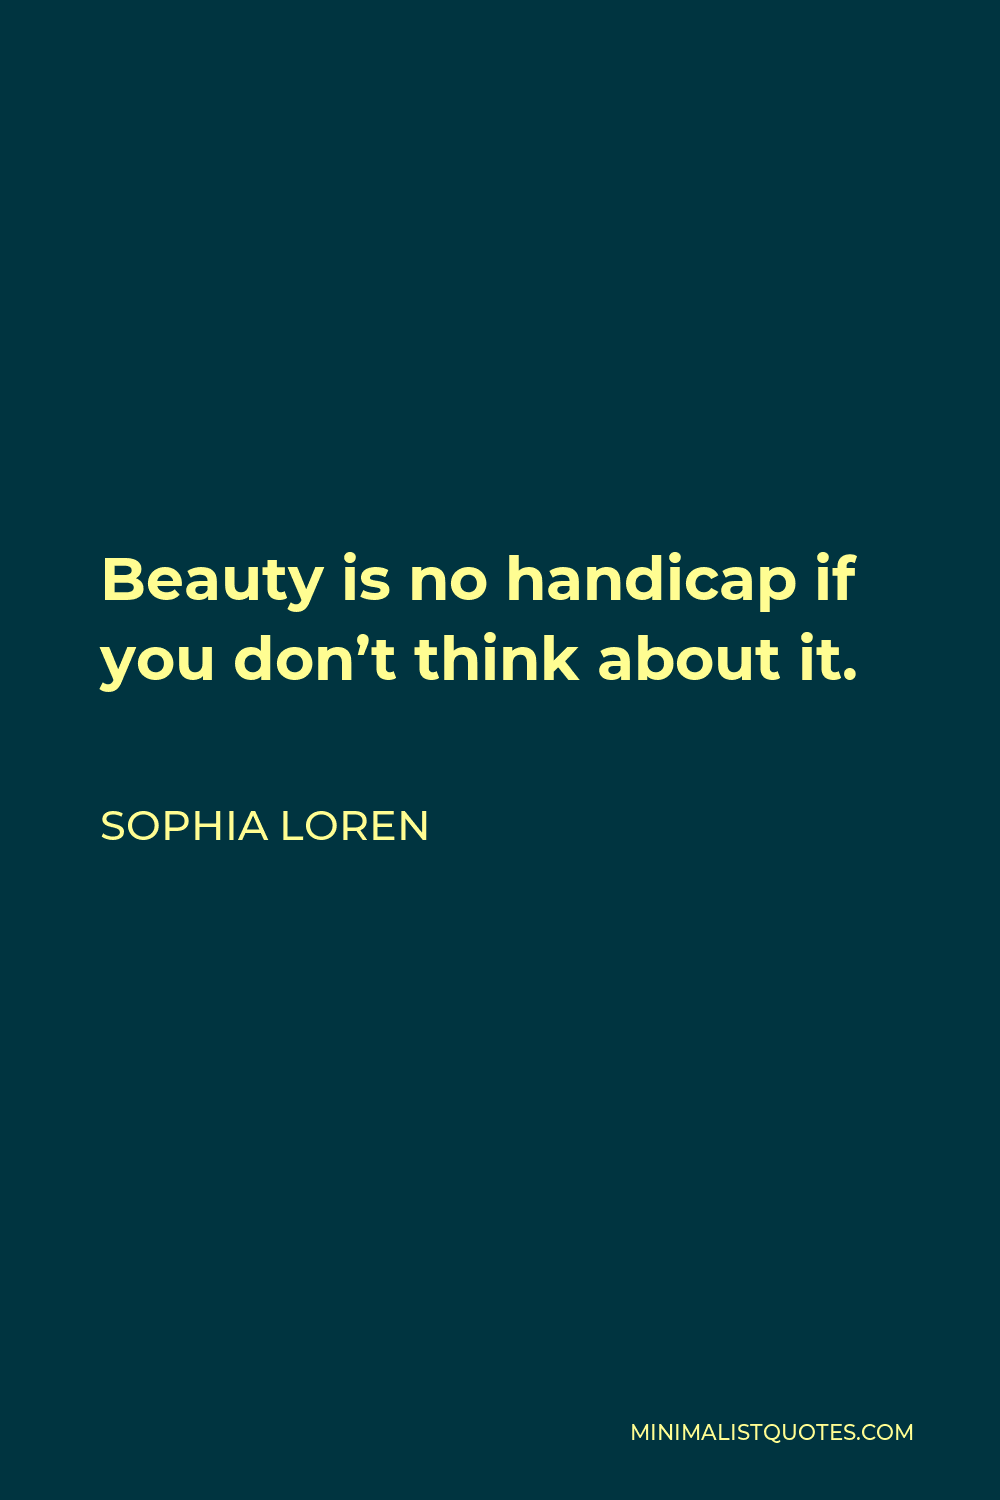 Sophia Loren Quote - Beauty is no handicap if you don’t think about it.